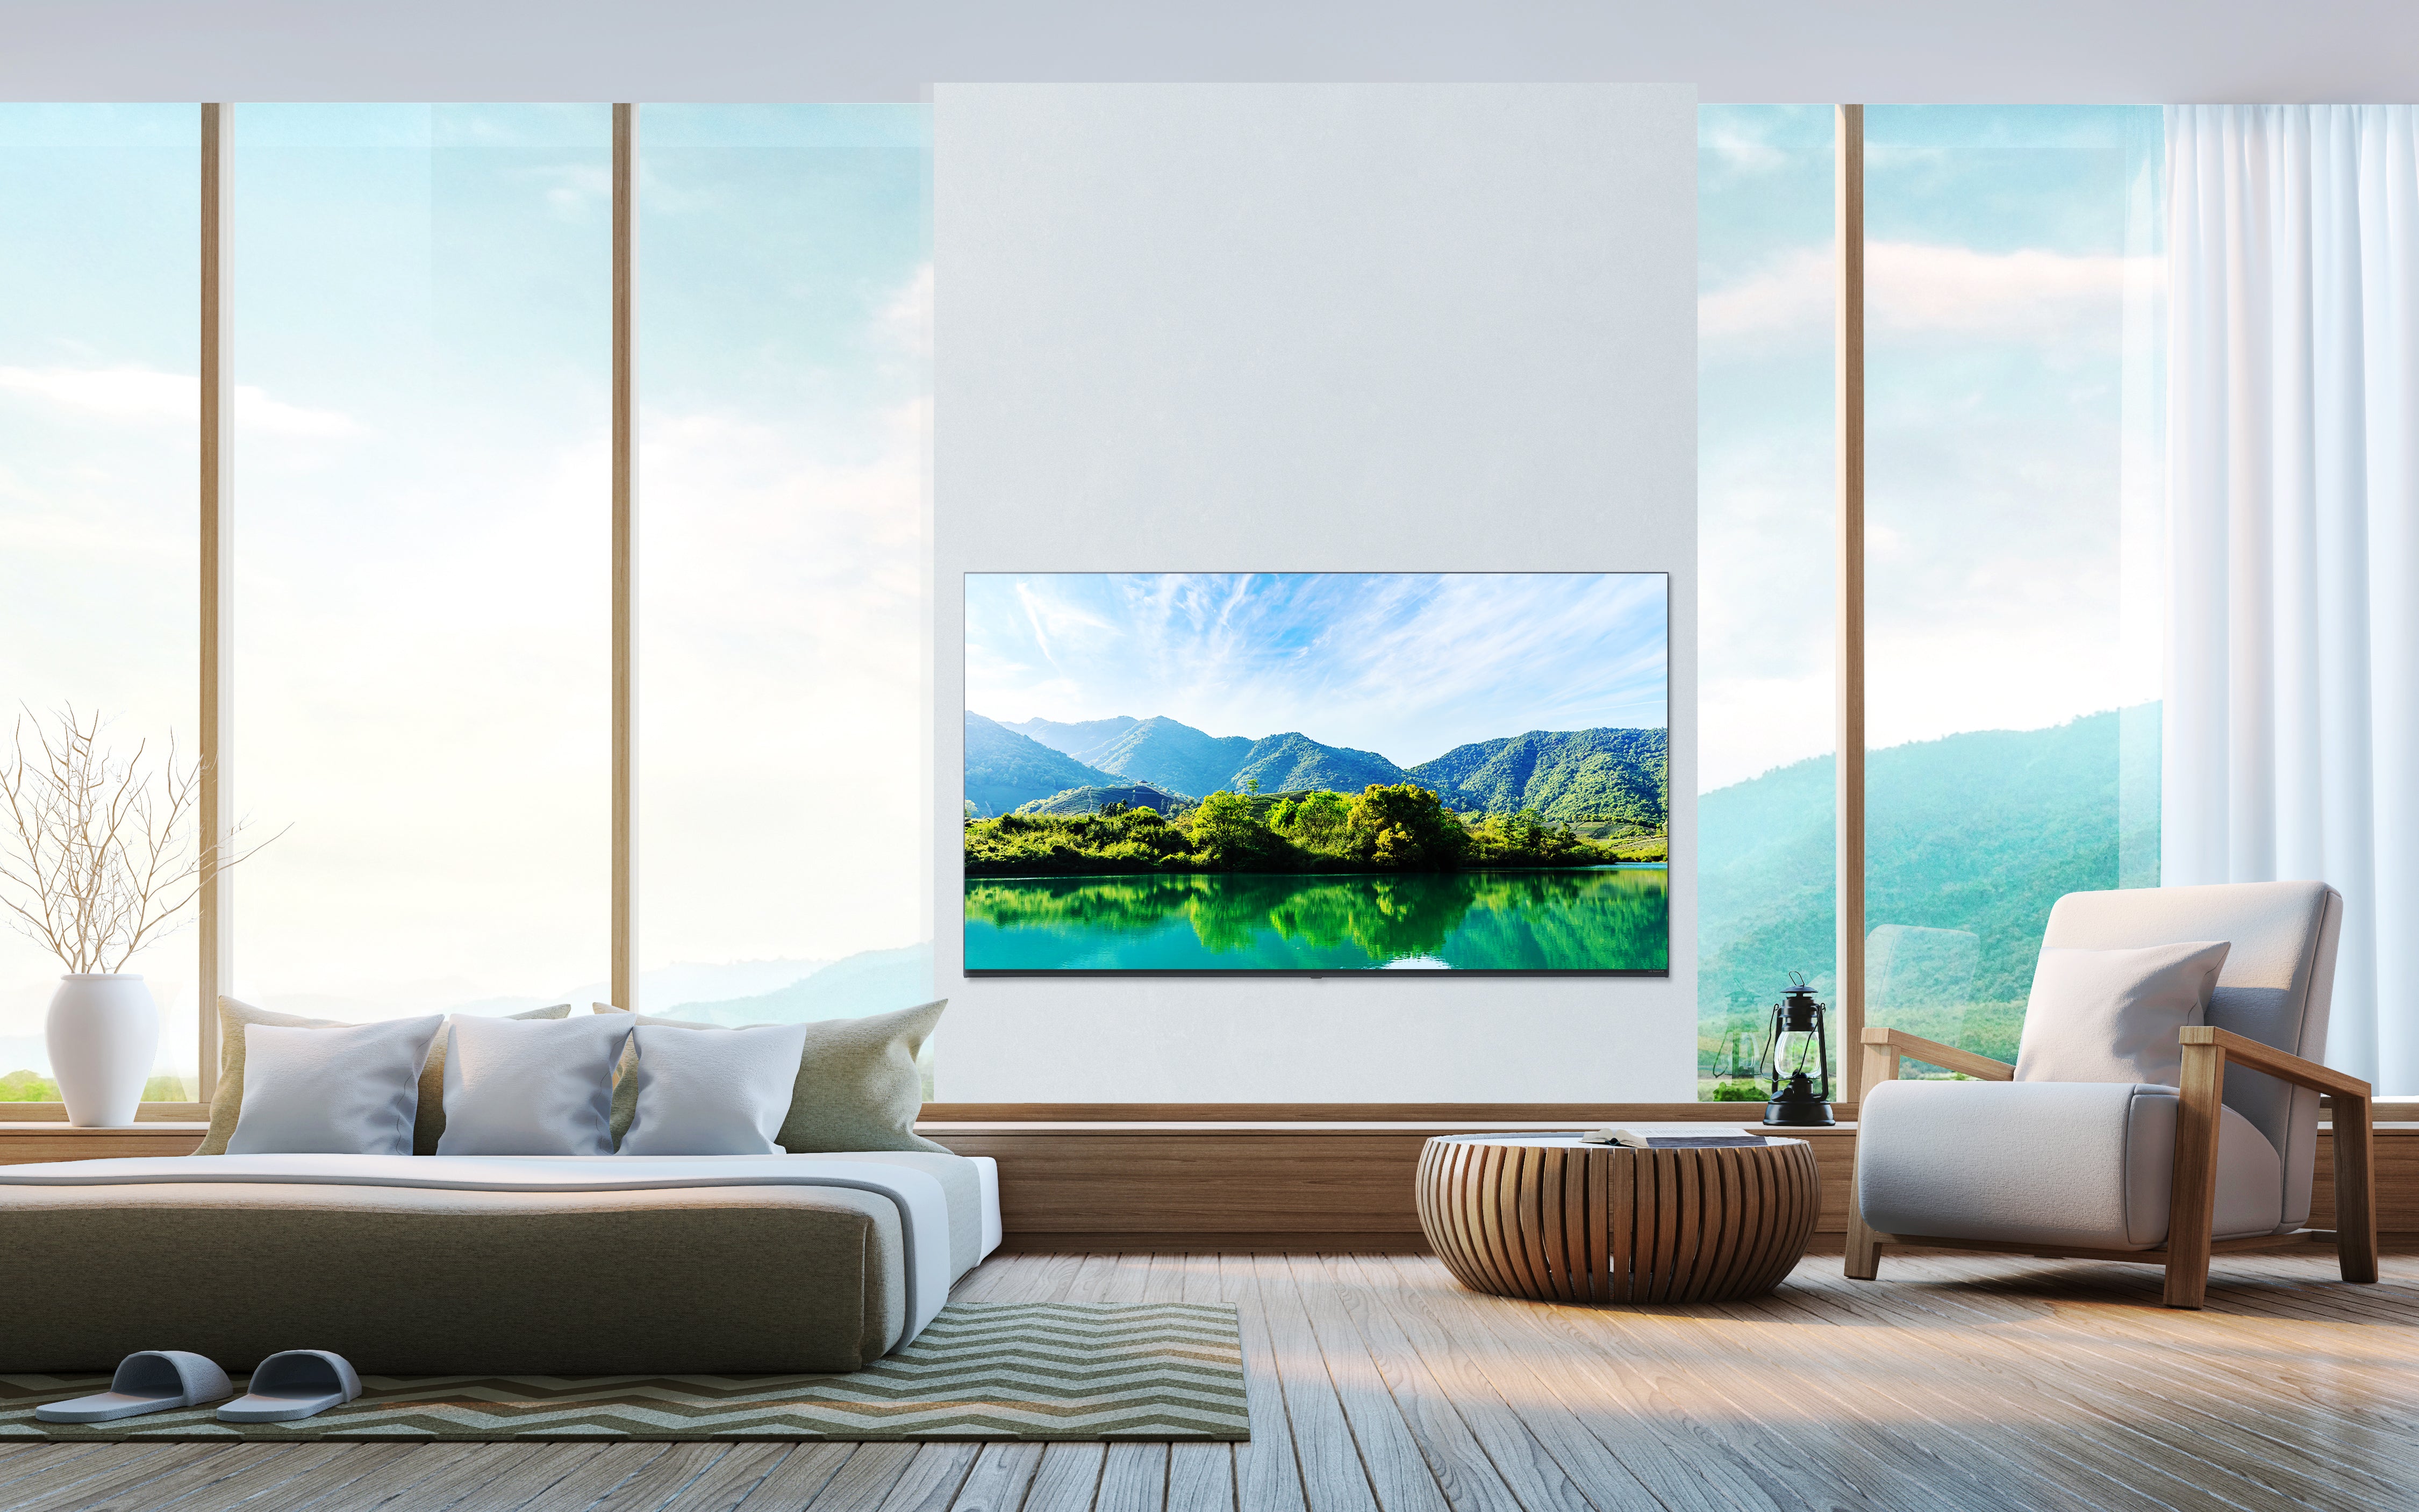 32” HD TV for Hospitality and Healthcare